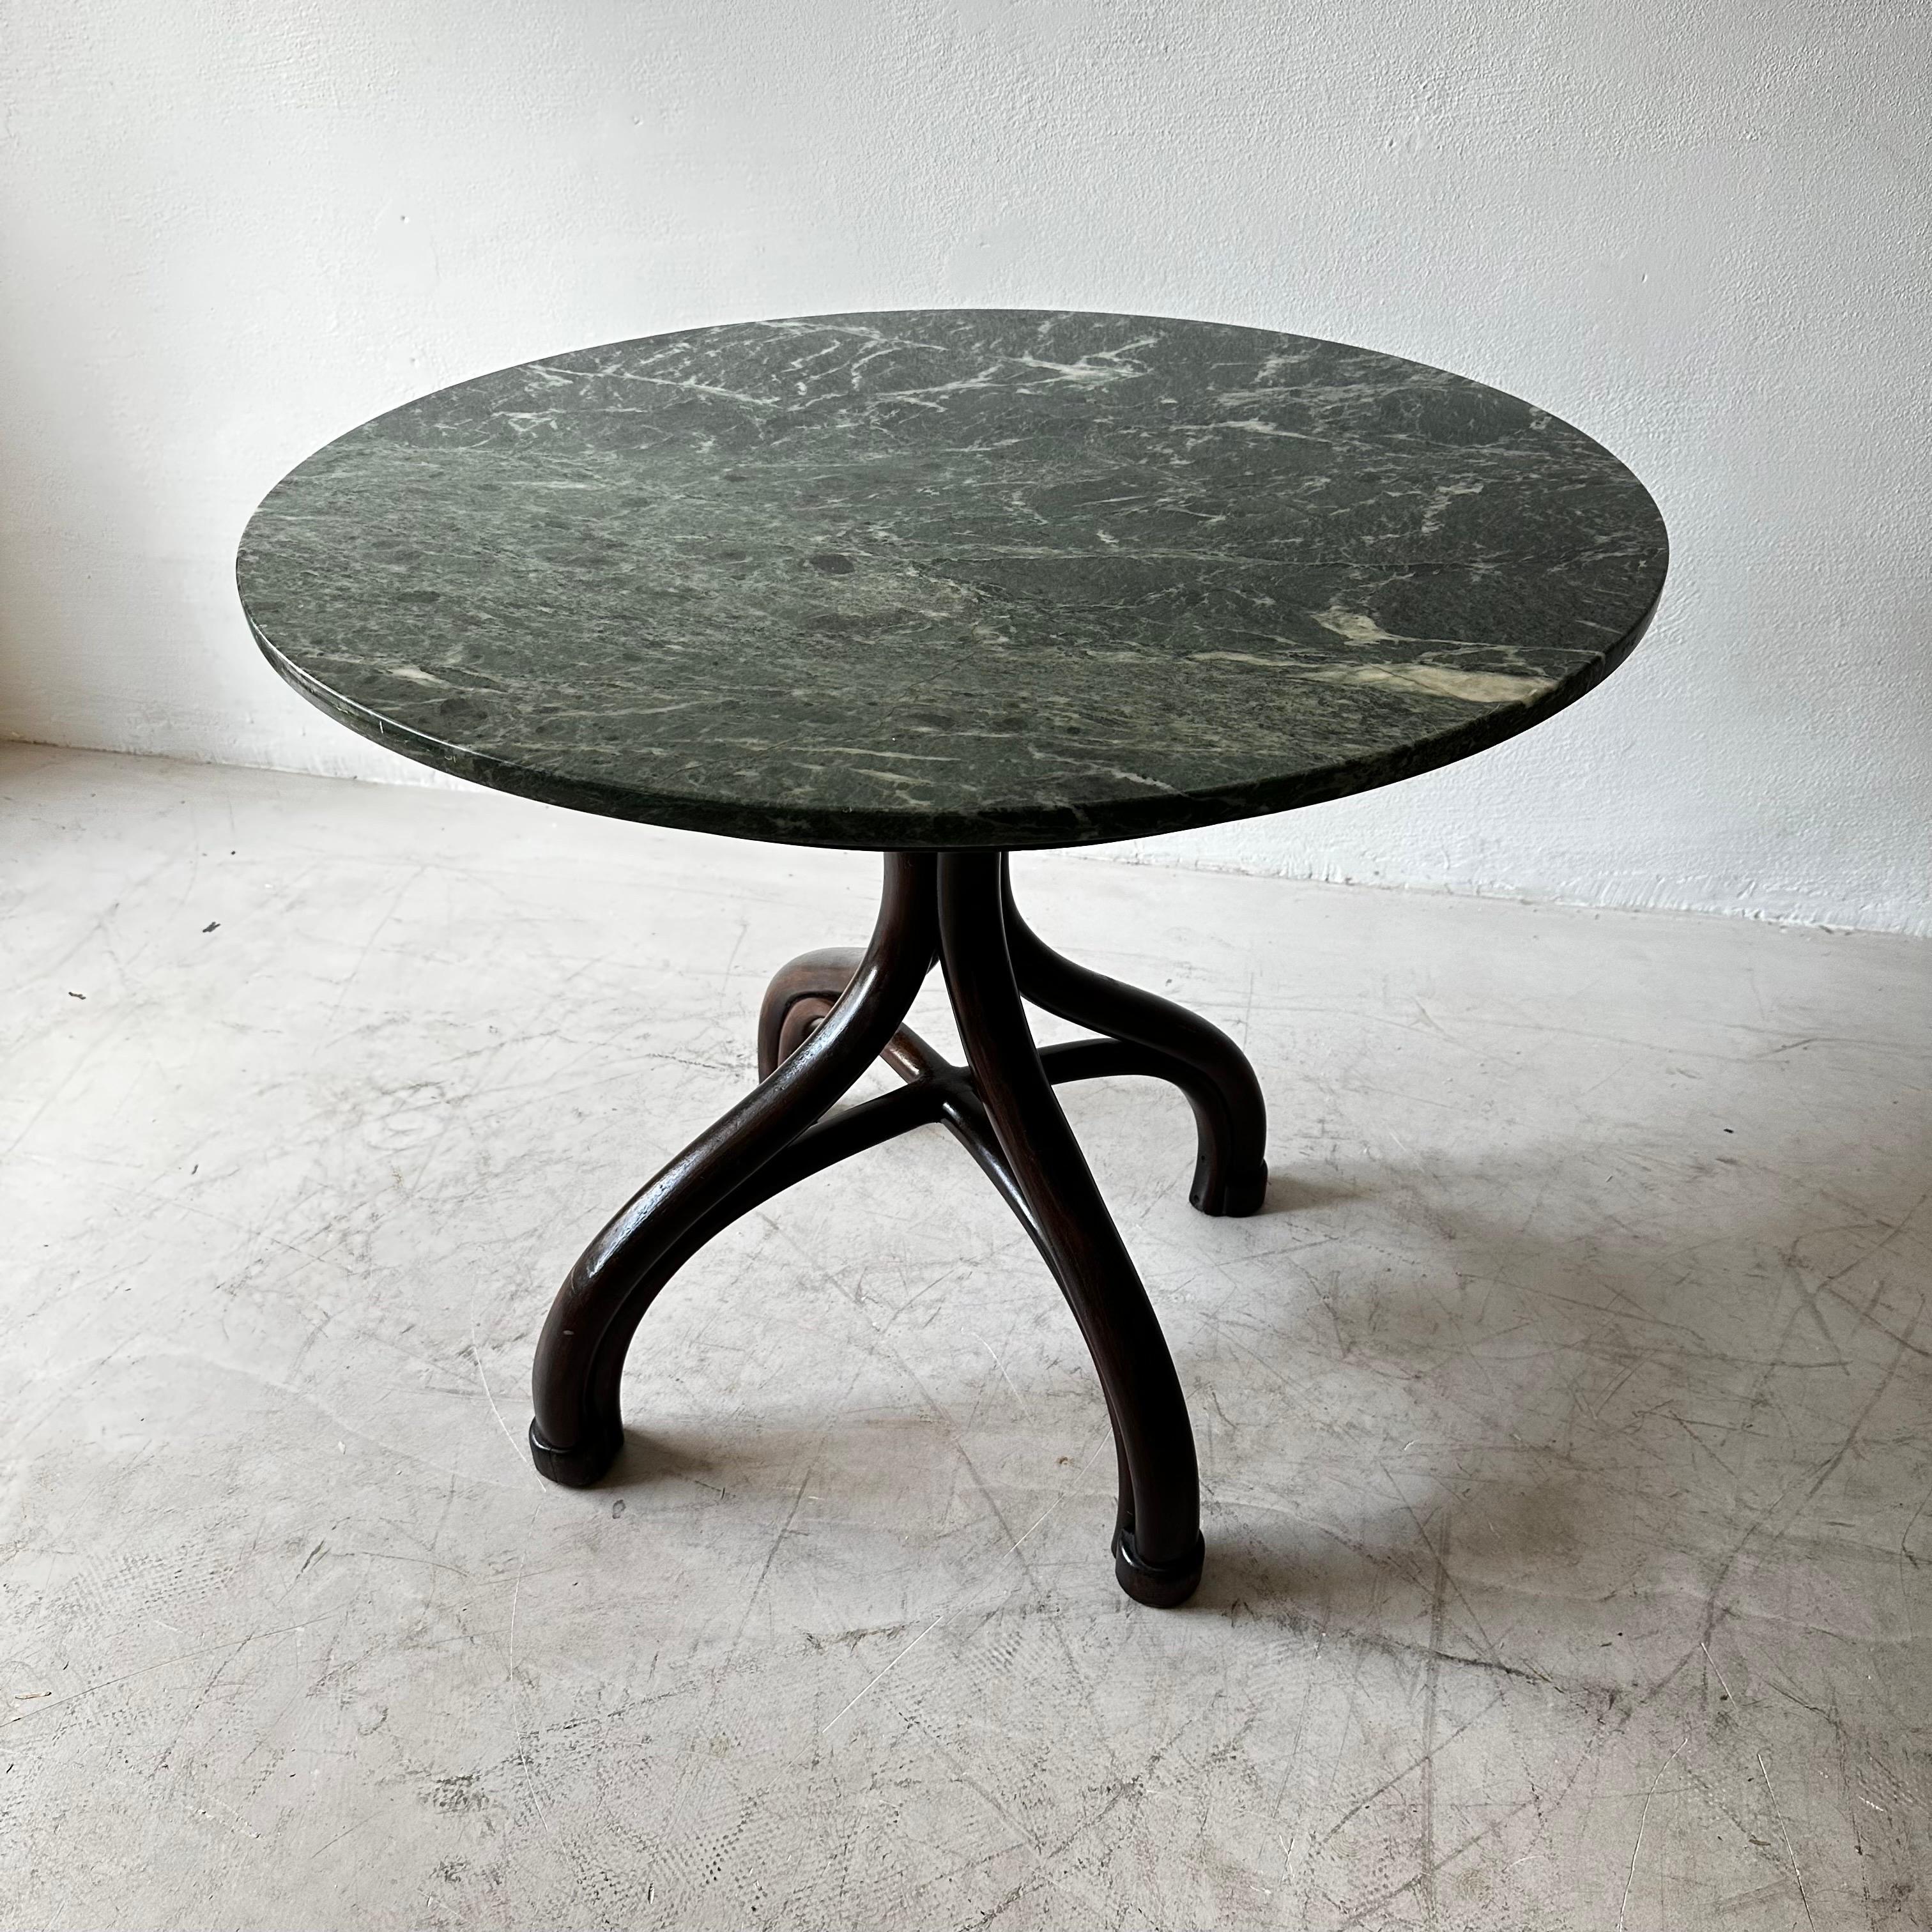 Adolf Loos Cafe Museum Center Hall Table with Green Marble Top, Austria 1910 For Sale 1